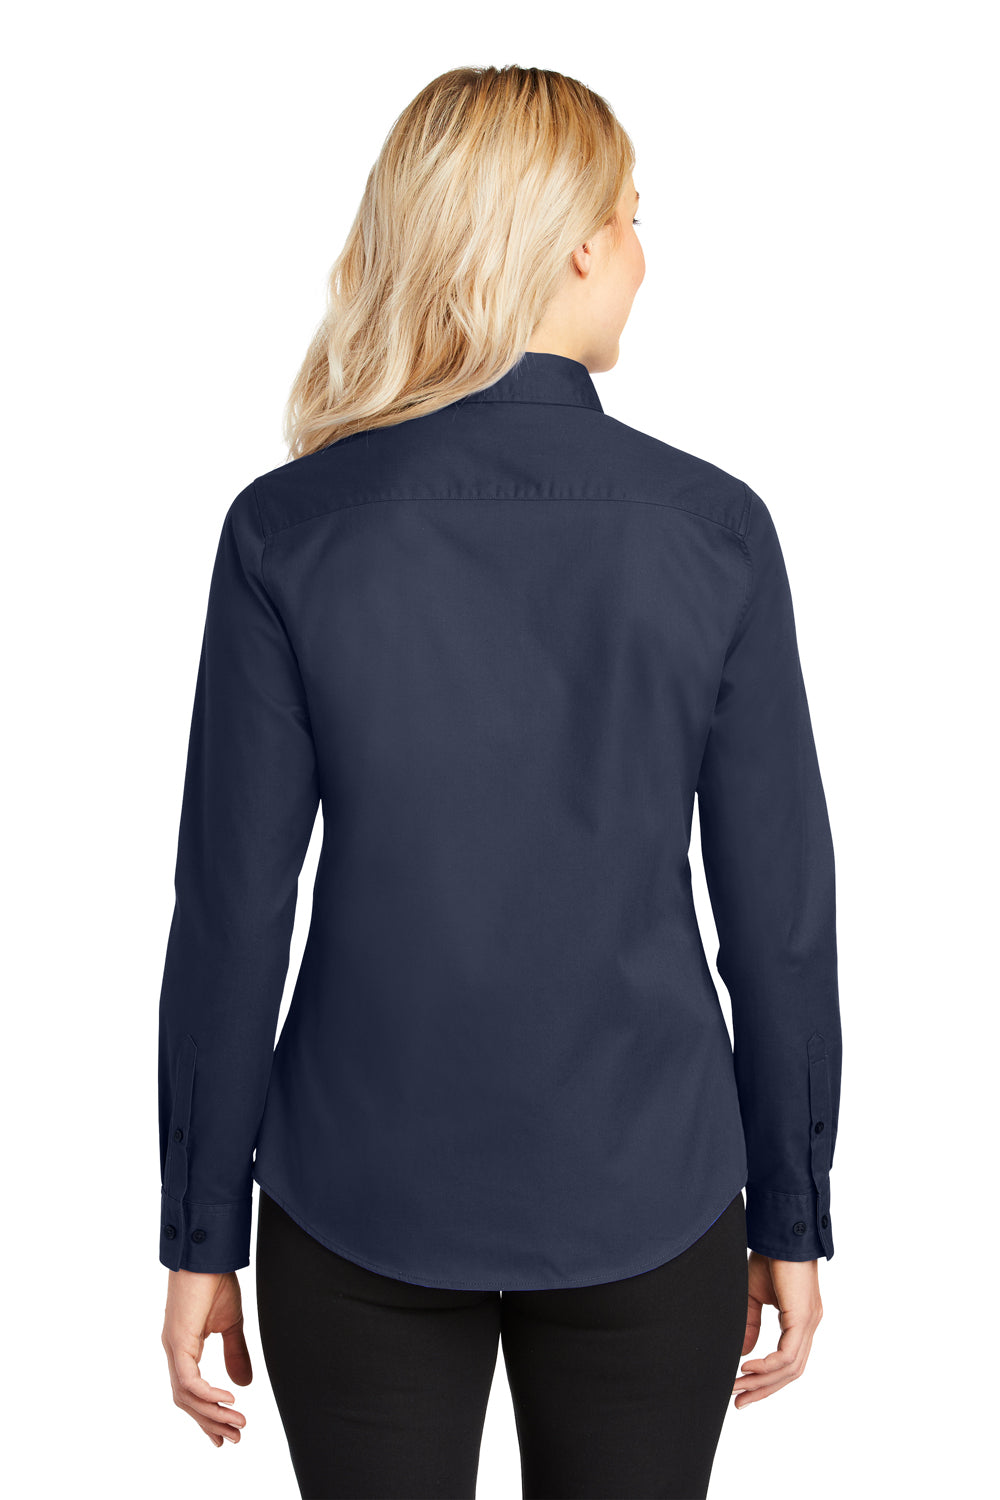 Port Authority L608 Womens Easy Care Wrinkle Resistant Long Sleeve Button Down Shirt Navy Blue Back